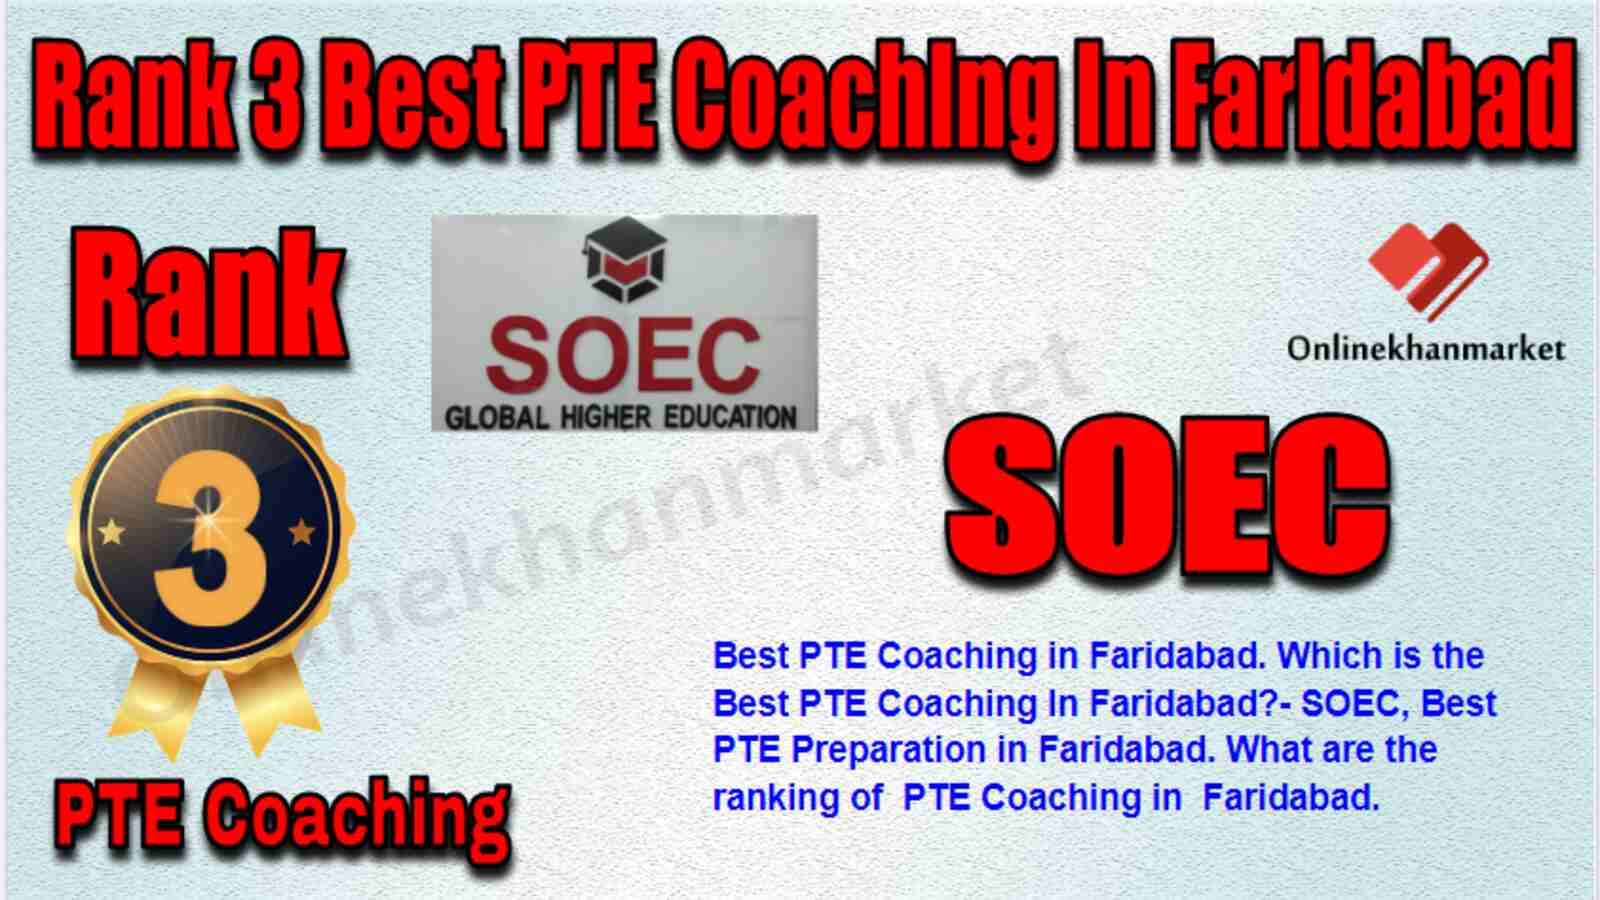 Rank 3 Best PTE Coaching in Faridabad